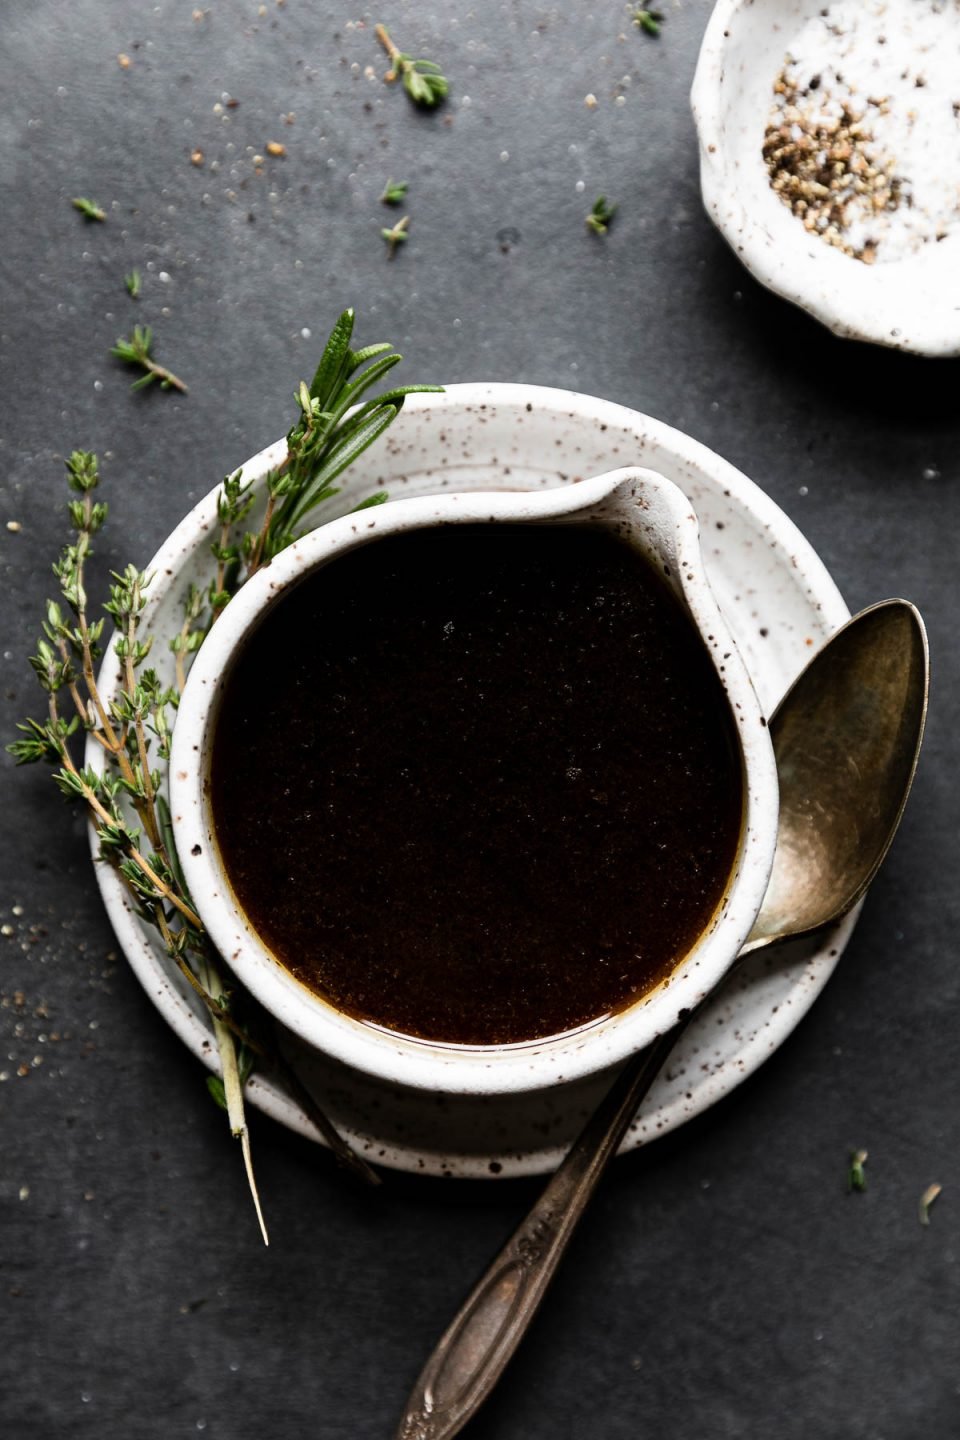 Au jus sauce made with beef drippings fills a small ceramic bowl with a pour spout. The bowl sits atop a matching ceramic plate with fresh herbs and a small spoon resting on top of the plate. A small ceramic pinch bowl filled with kosher salt and black pepper sits alongside the au jus and loose pieces of fresh herbs surround. All items sit atop a dark textured surface.